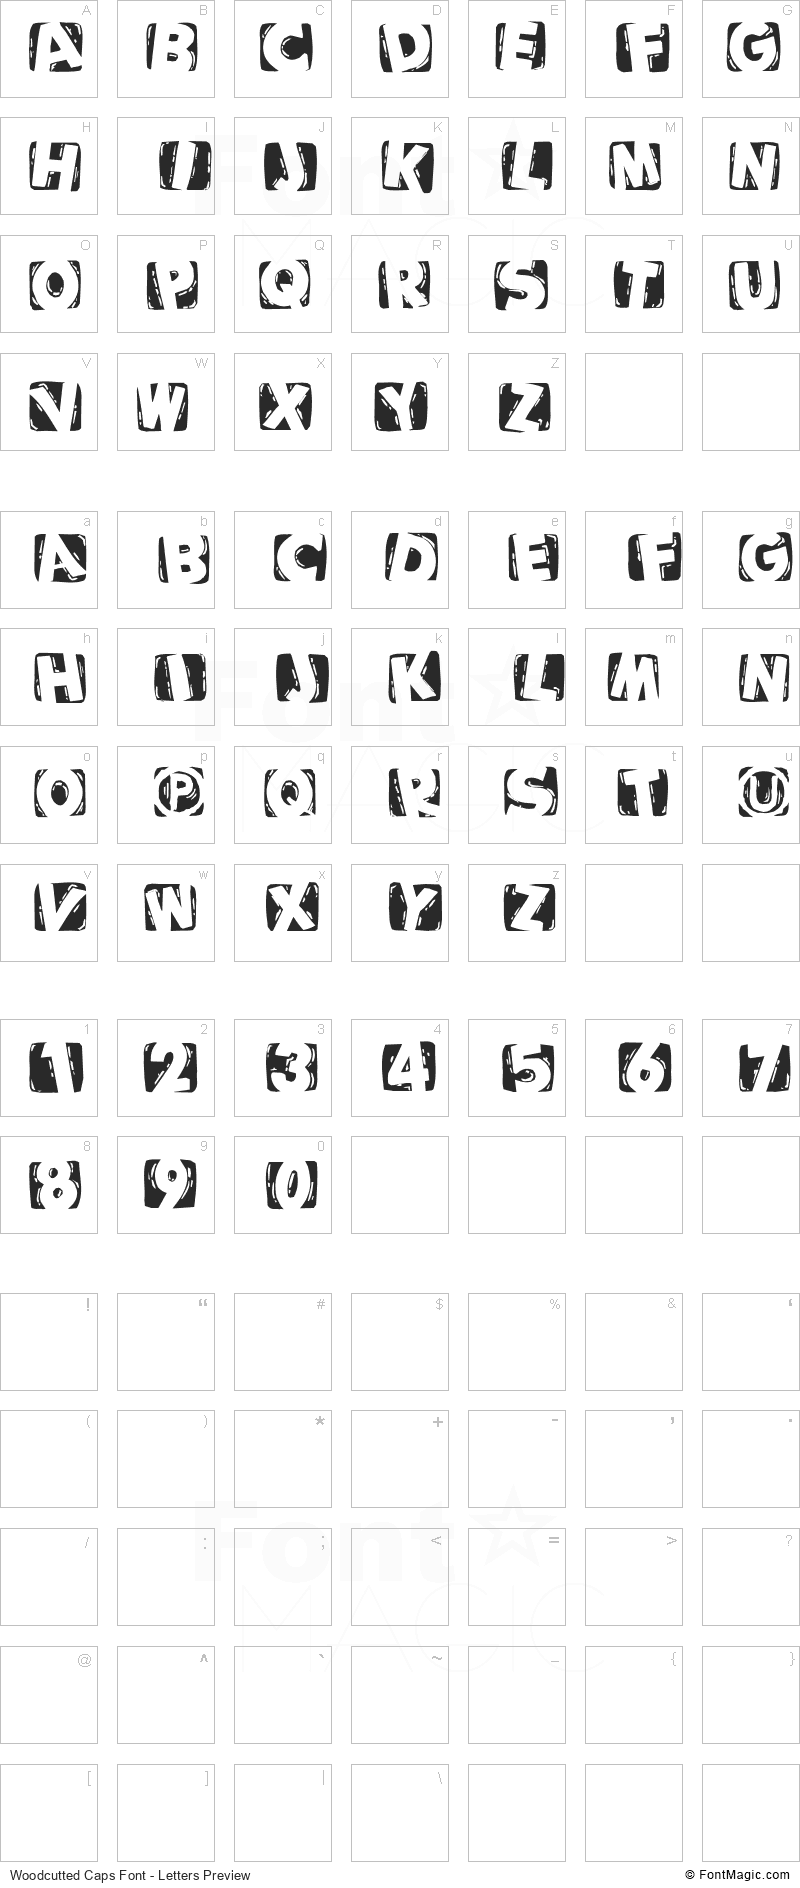 Woodcutted Caps Font - All Latters Preview Chart